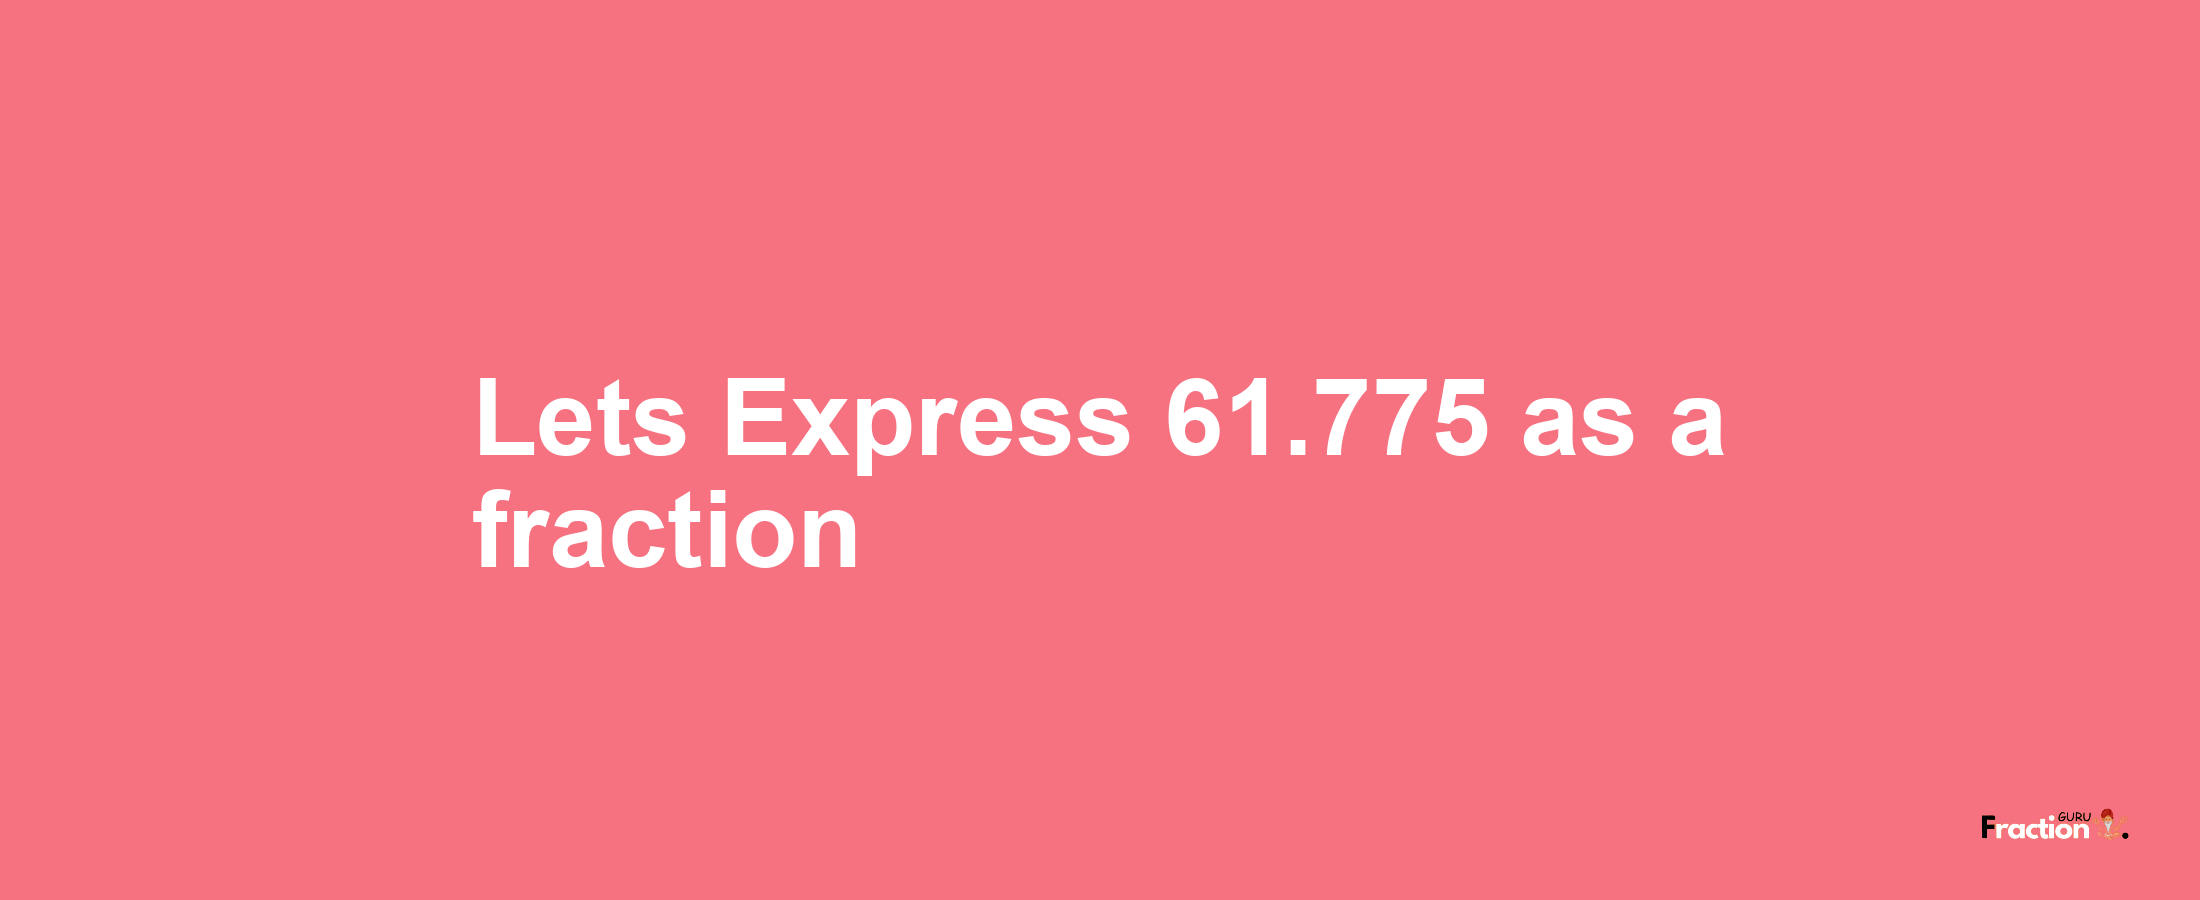 Lets Express 61.775 as afraction